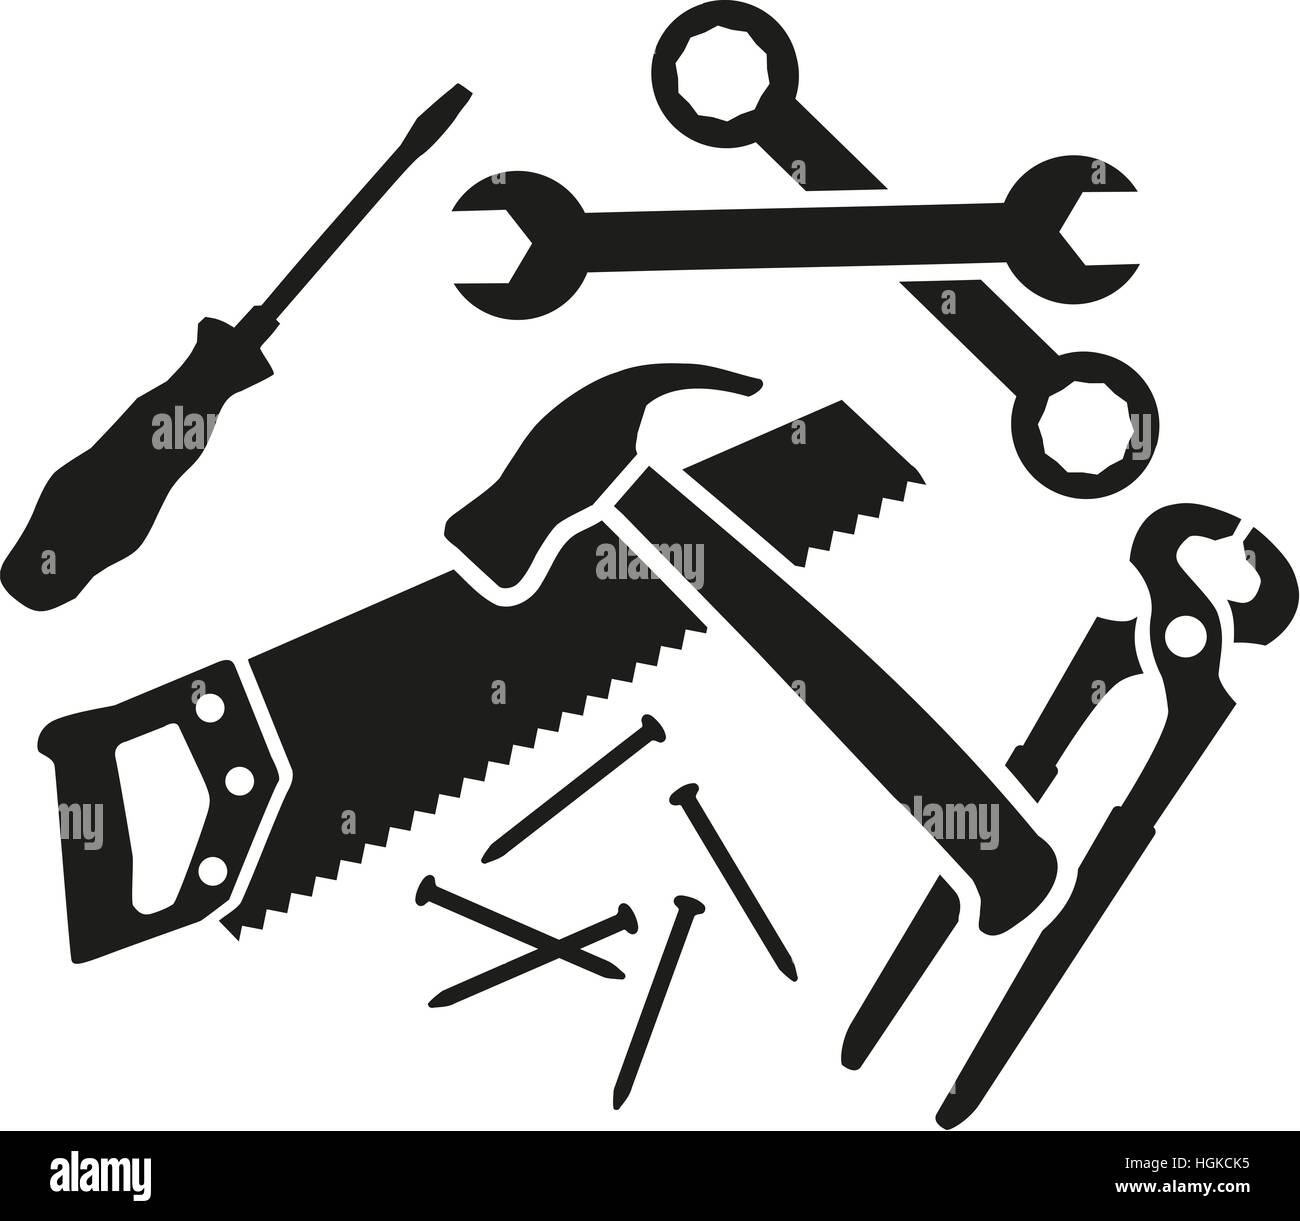 Chaos of working tools - screwdriver, wrench, hammer, saw, plier, nails Stock Photo